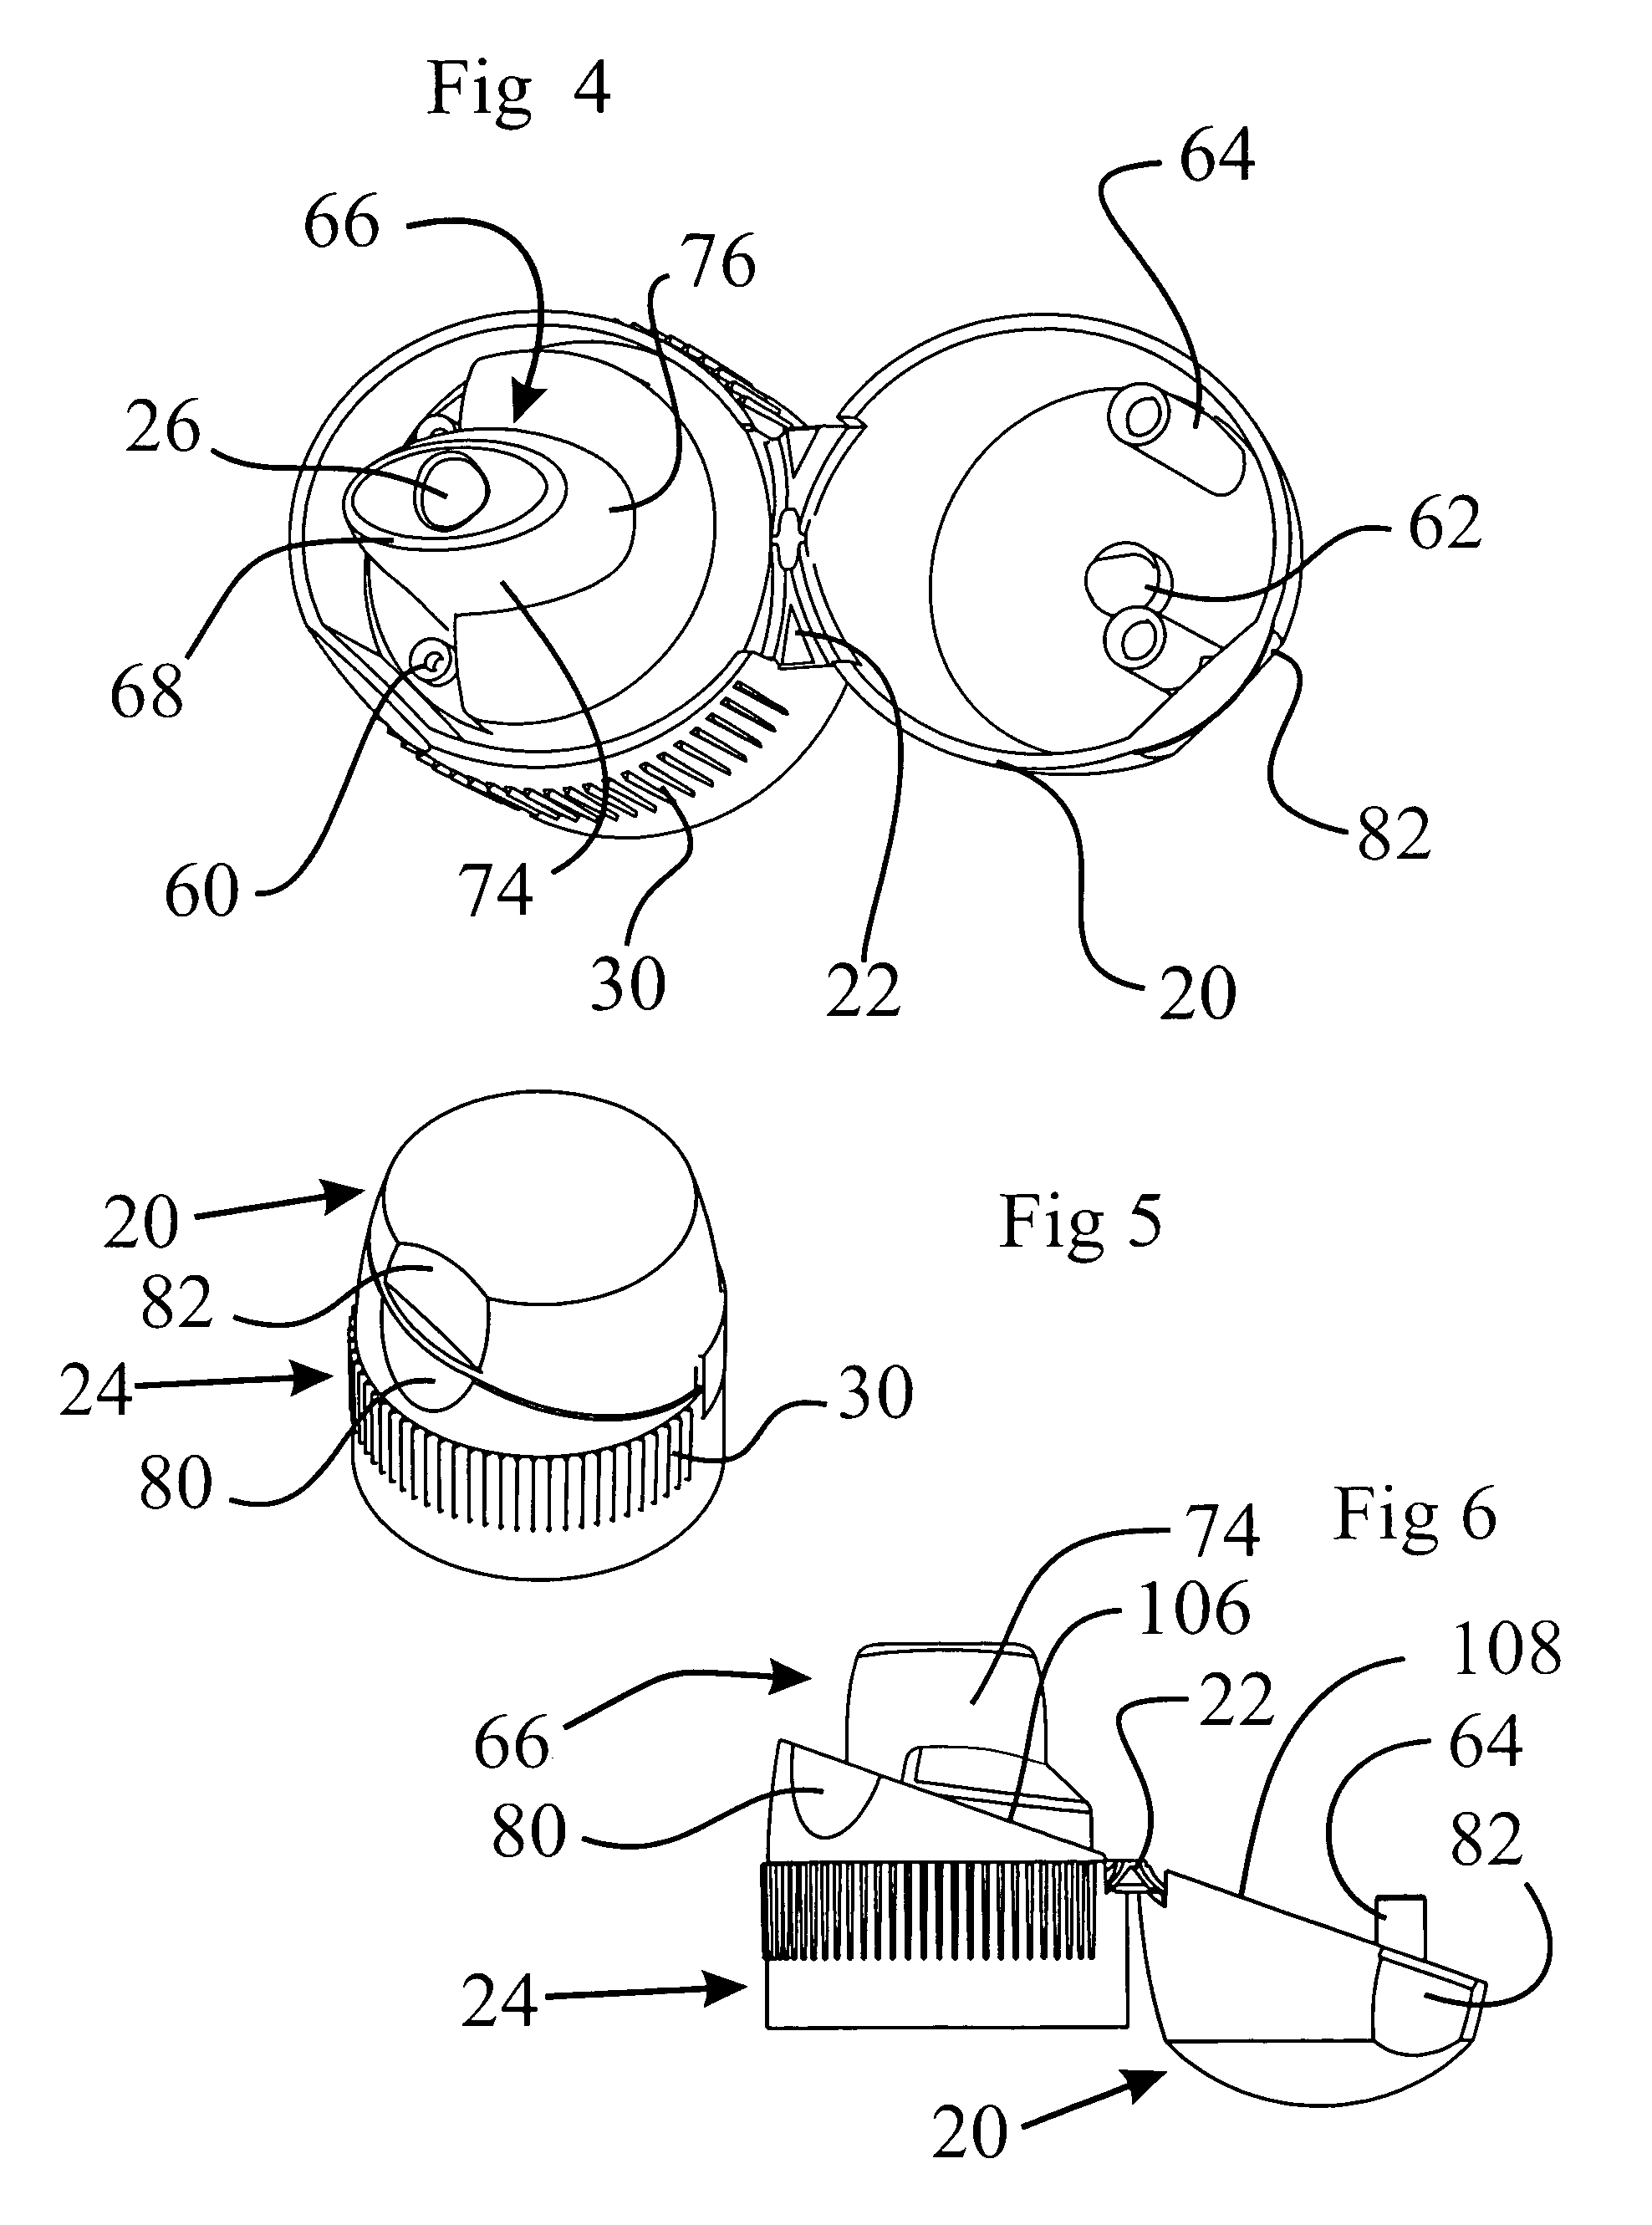 Vented fluid closure and container